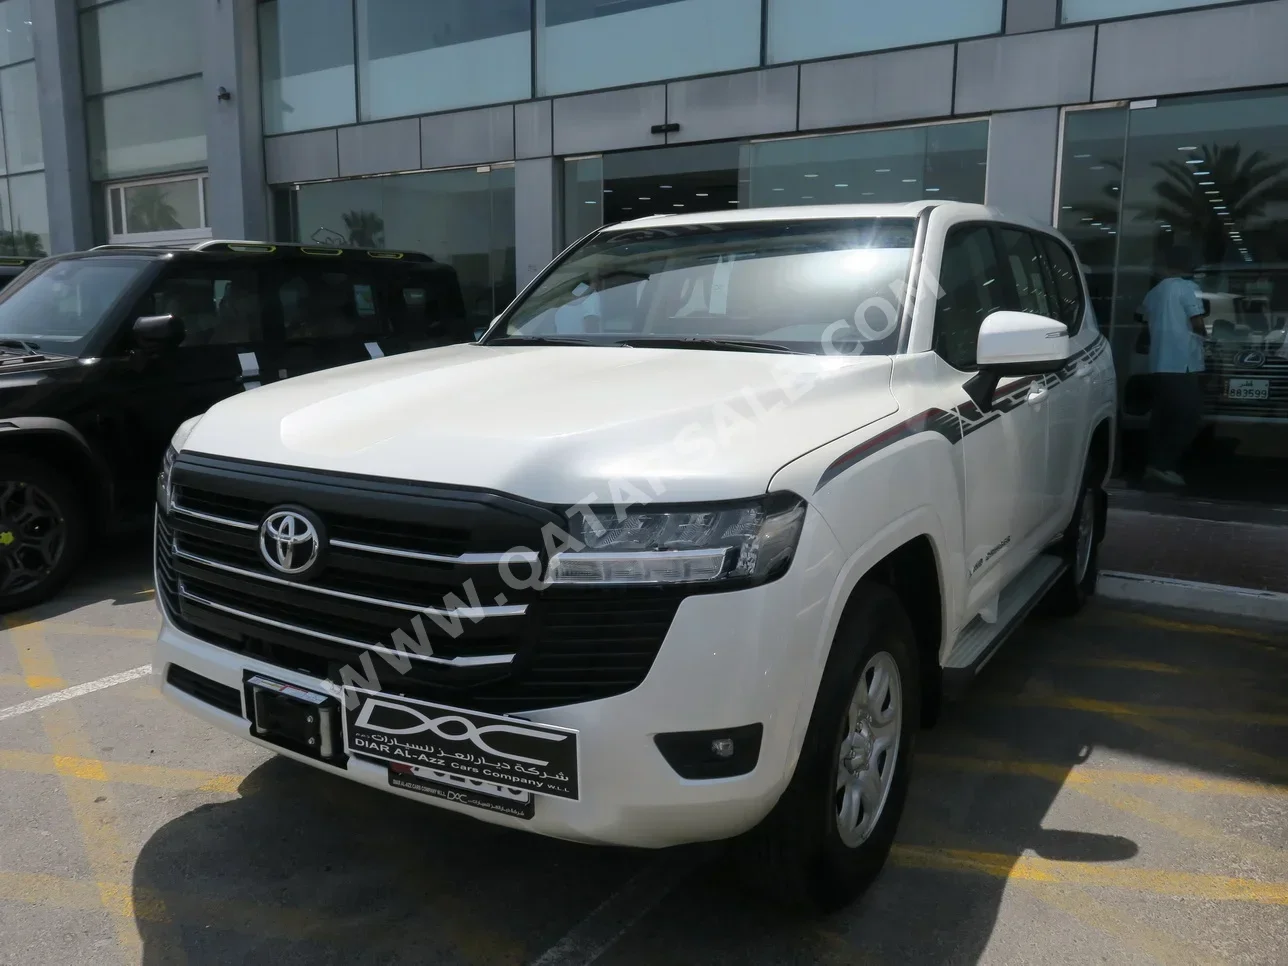 Toyota  Land Cruiser  GXR  2024  Automatic  0 Km  6 Cylinder  Four Wheel Drive (4WD)  SUV  White  With Warranty